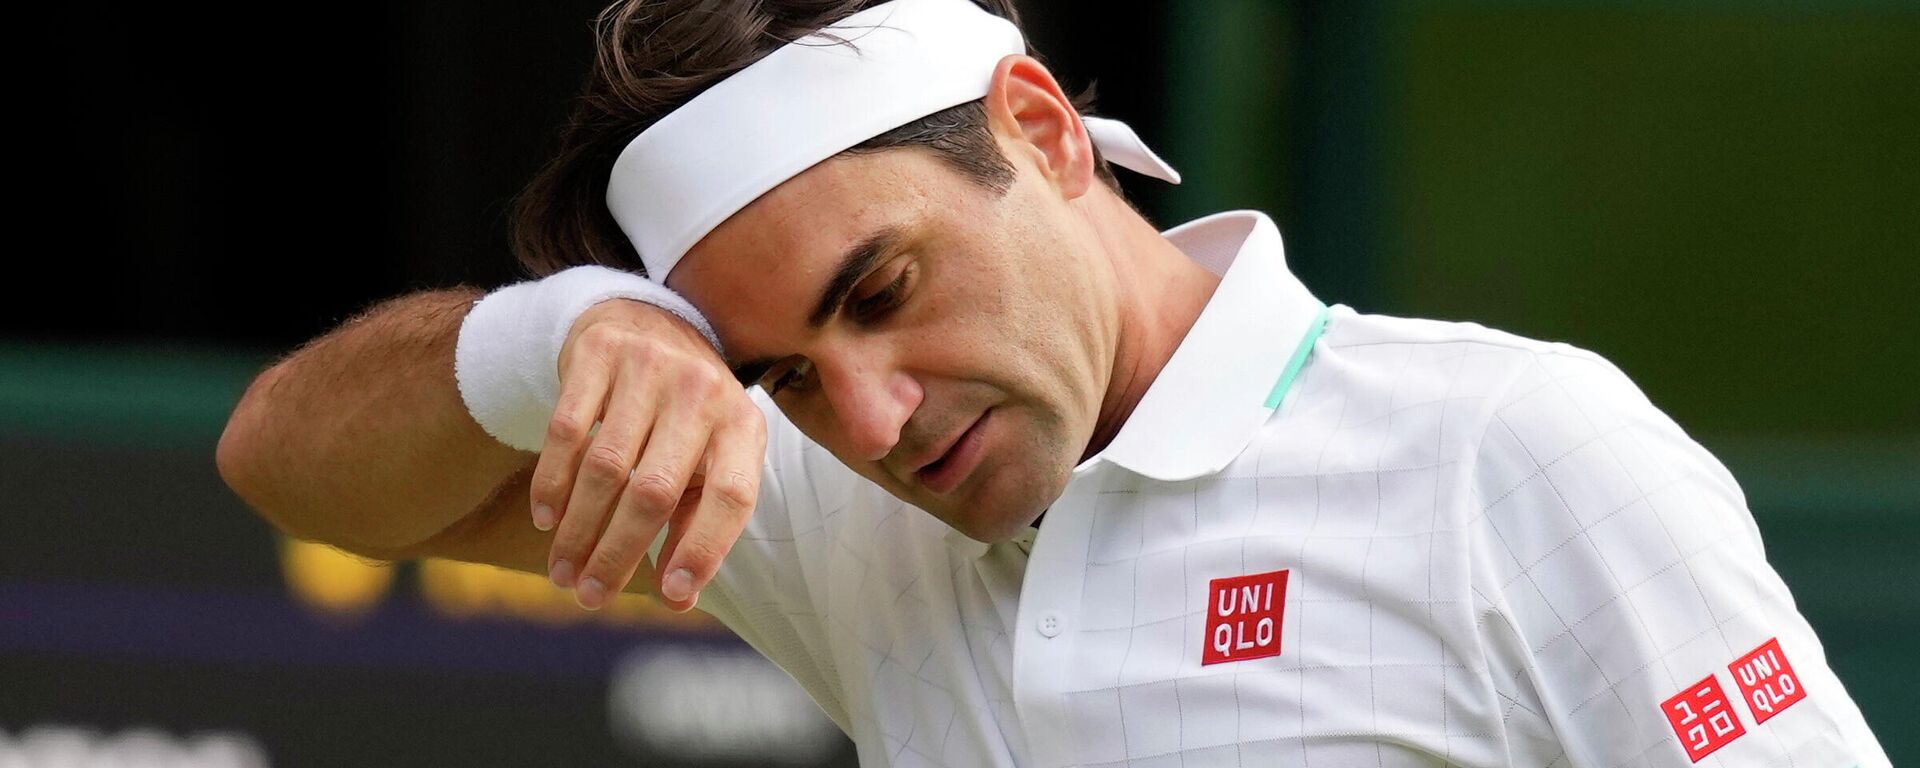 FILE - In this July 7, 2021, file photo, Switzerland's Roger Federer wipes his brow during the men's singles quarterfinals match against Poland's Hubert Hurkacz on day nine of the Wimbledon Tennis Championships in London - Sputnik International, 1920, 13.07.2022